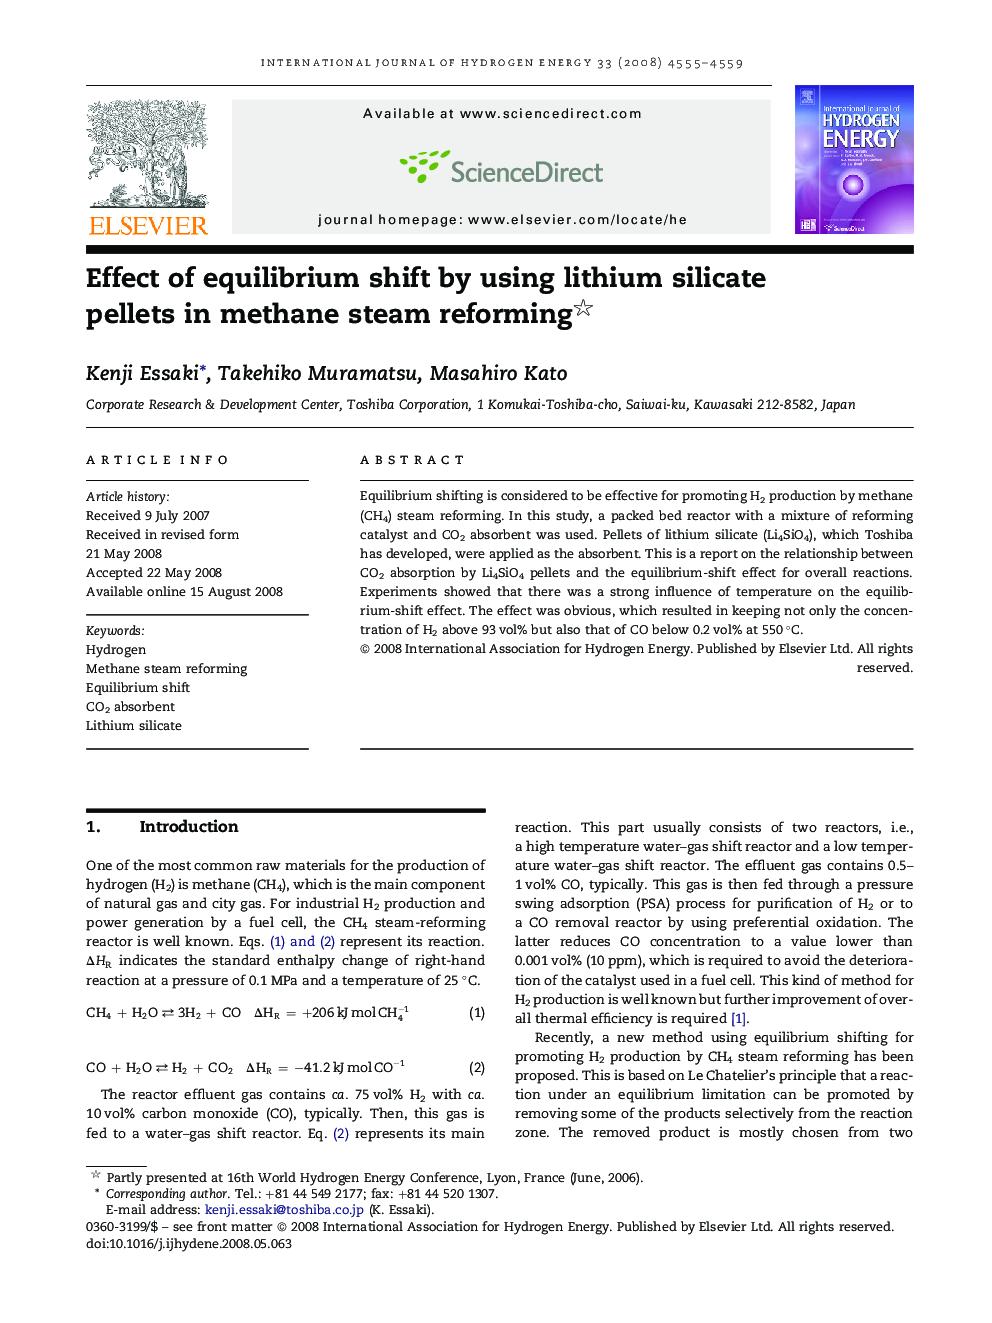 Effect of equilibrium shift by using lithium silicate pellets in methane steam reforming 